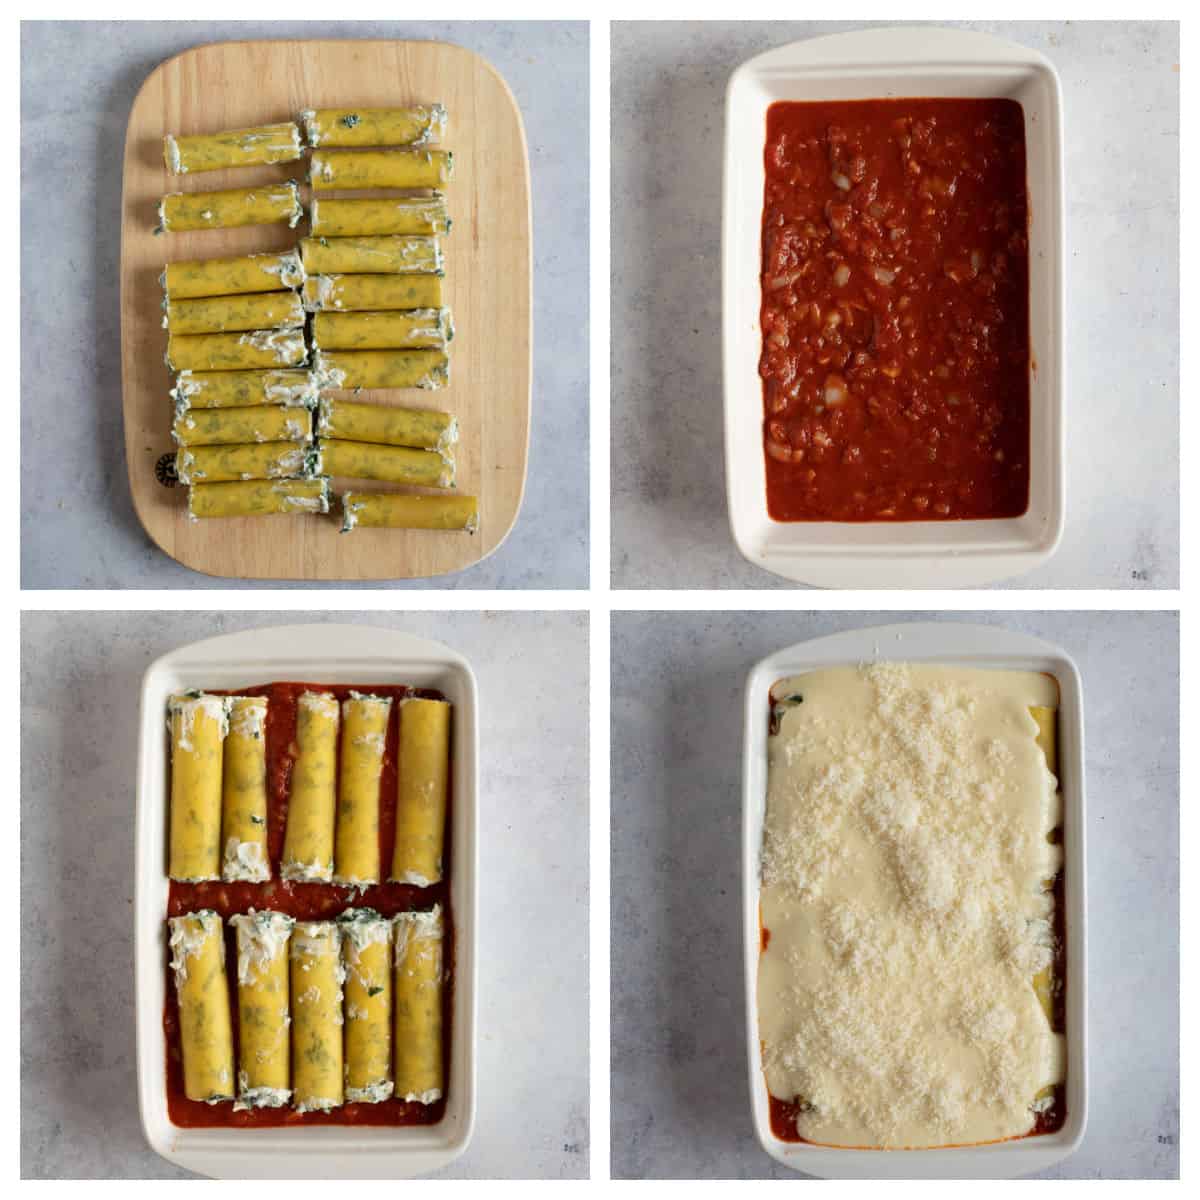 Assembling the spinach and ricotta cannelloni in a baking dish.